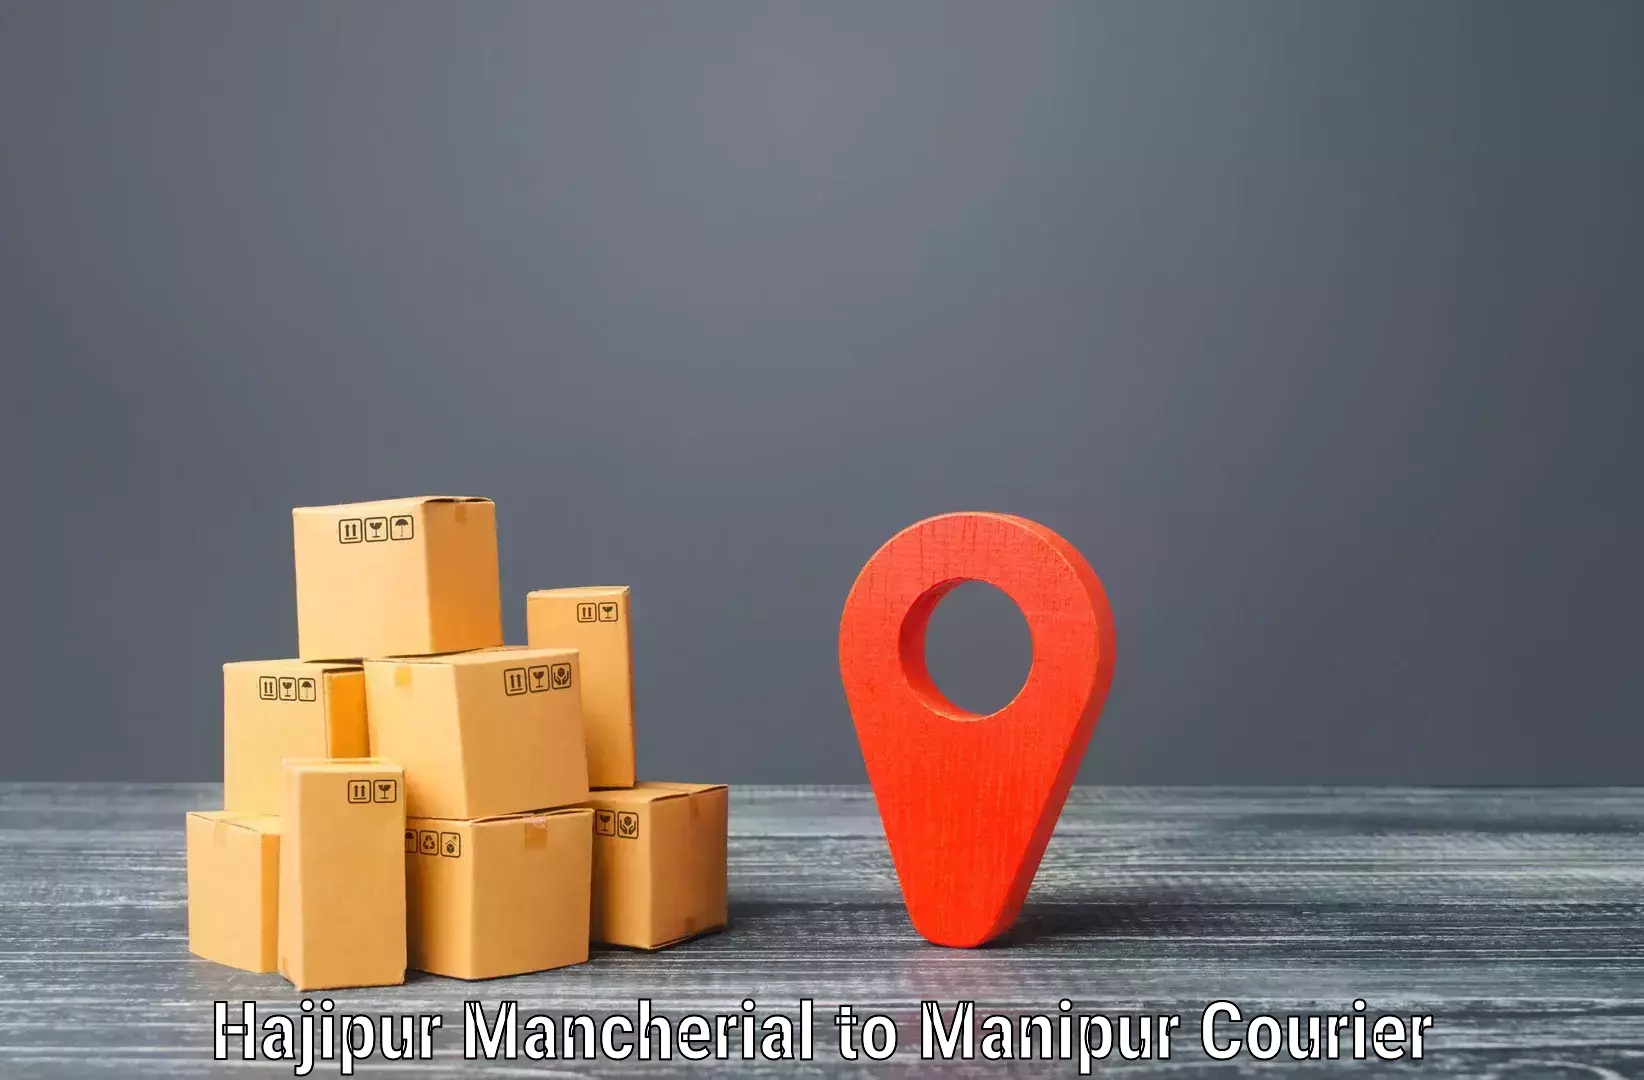 Quick booking process Hajipur Mancherial to Manipur